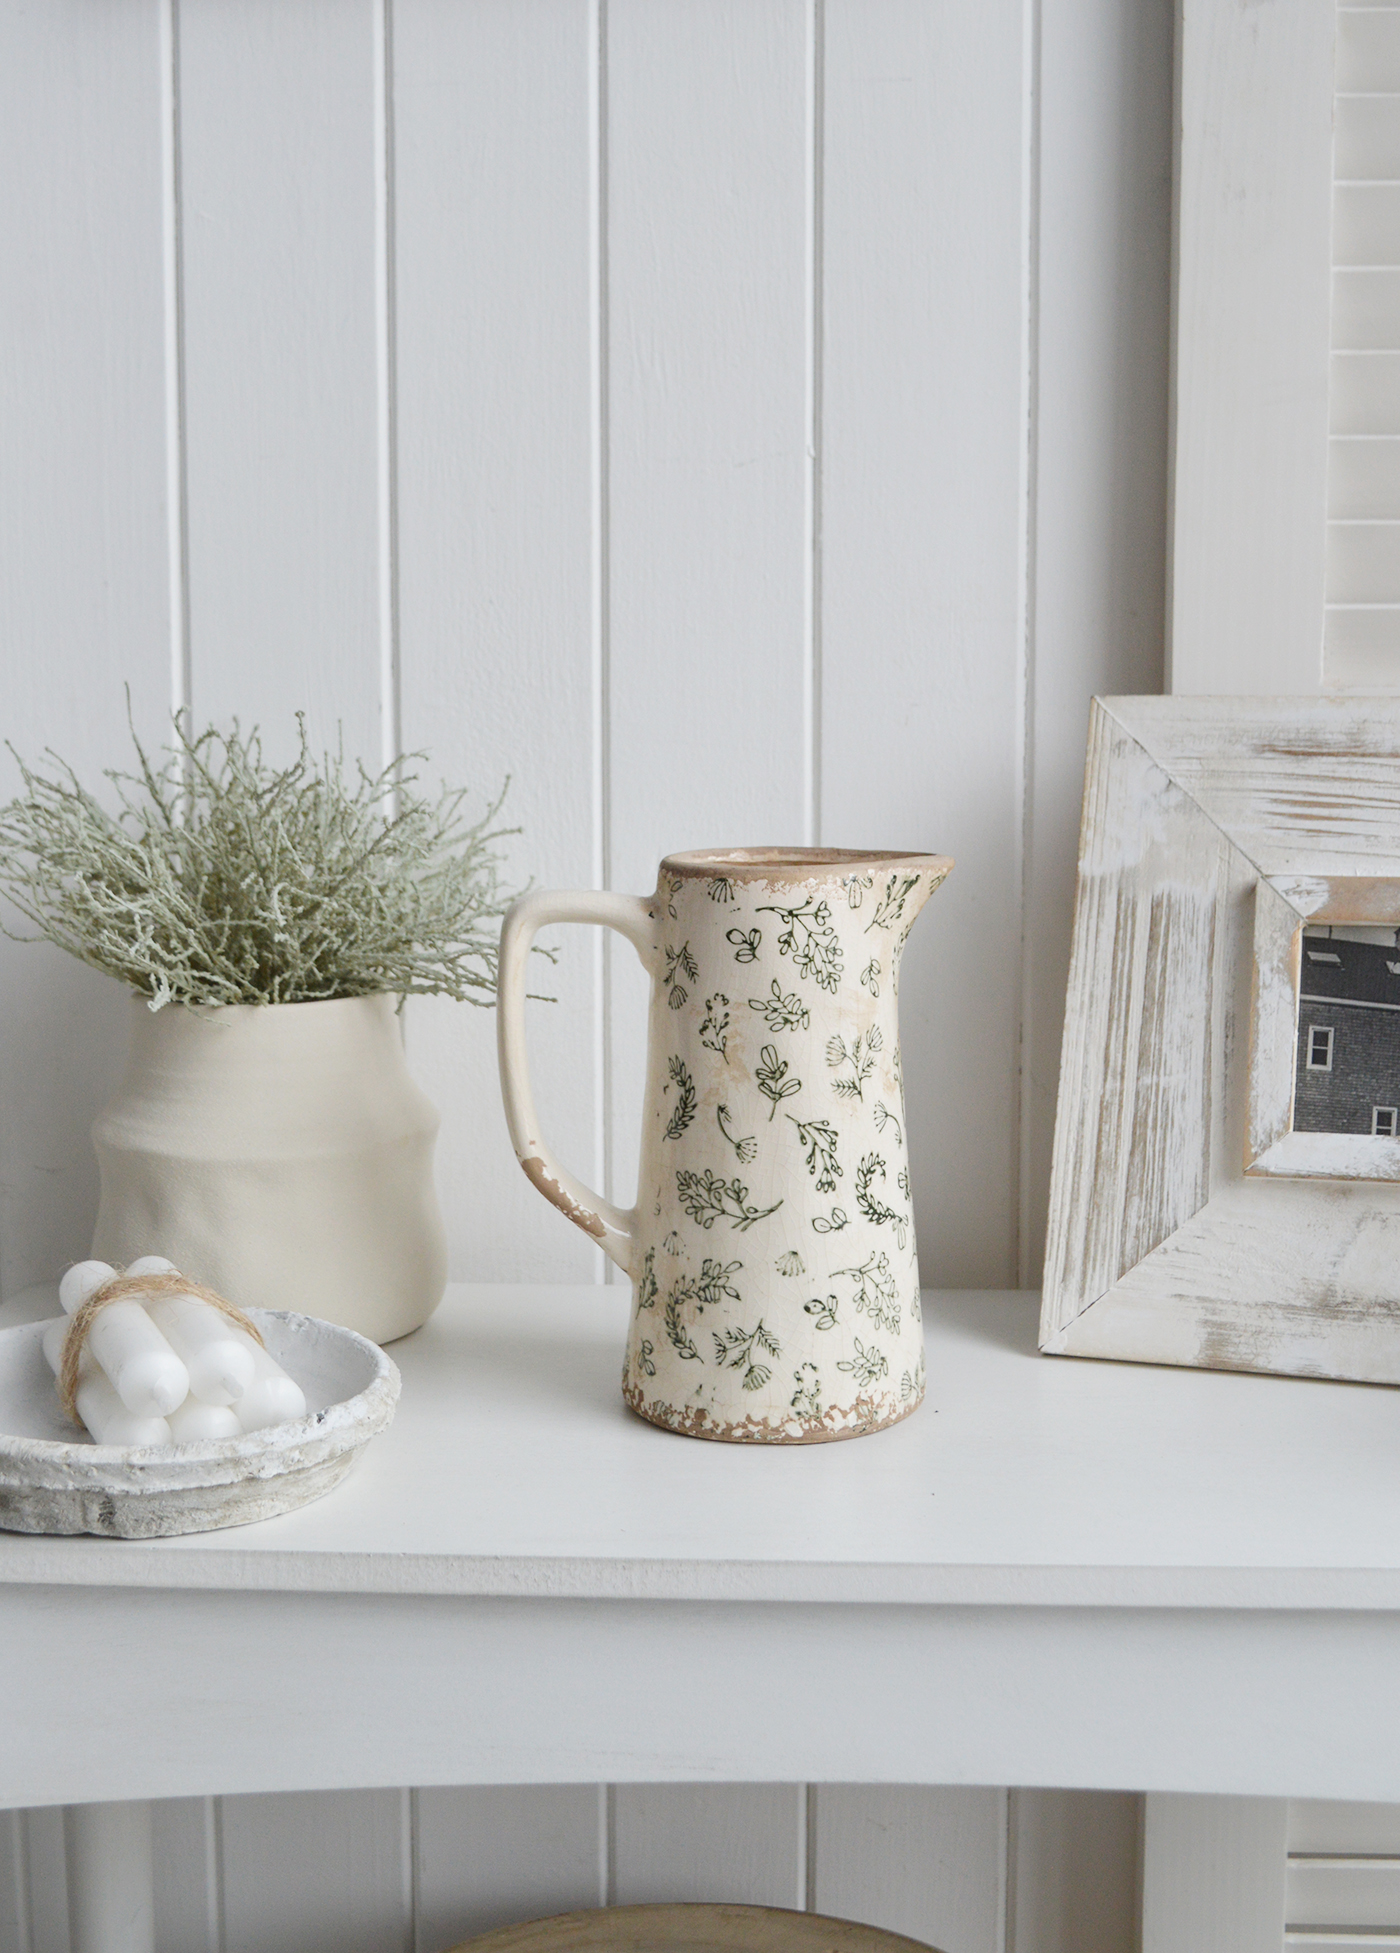 Westbrook Green and Aged White Ceramic Jug - New England, coastal, modern farmhouse and country homes interiors and furniture